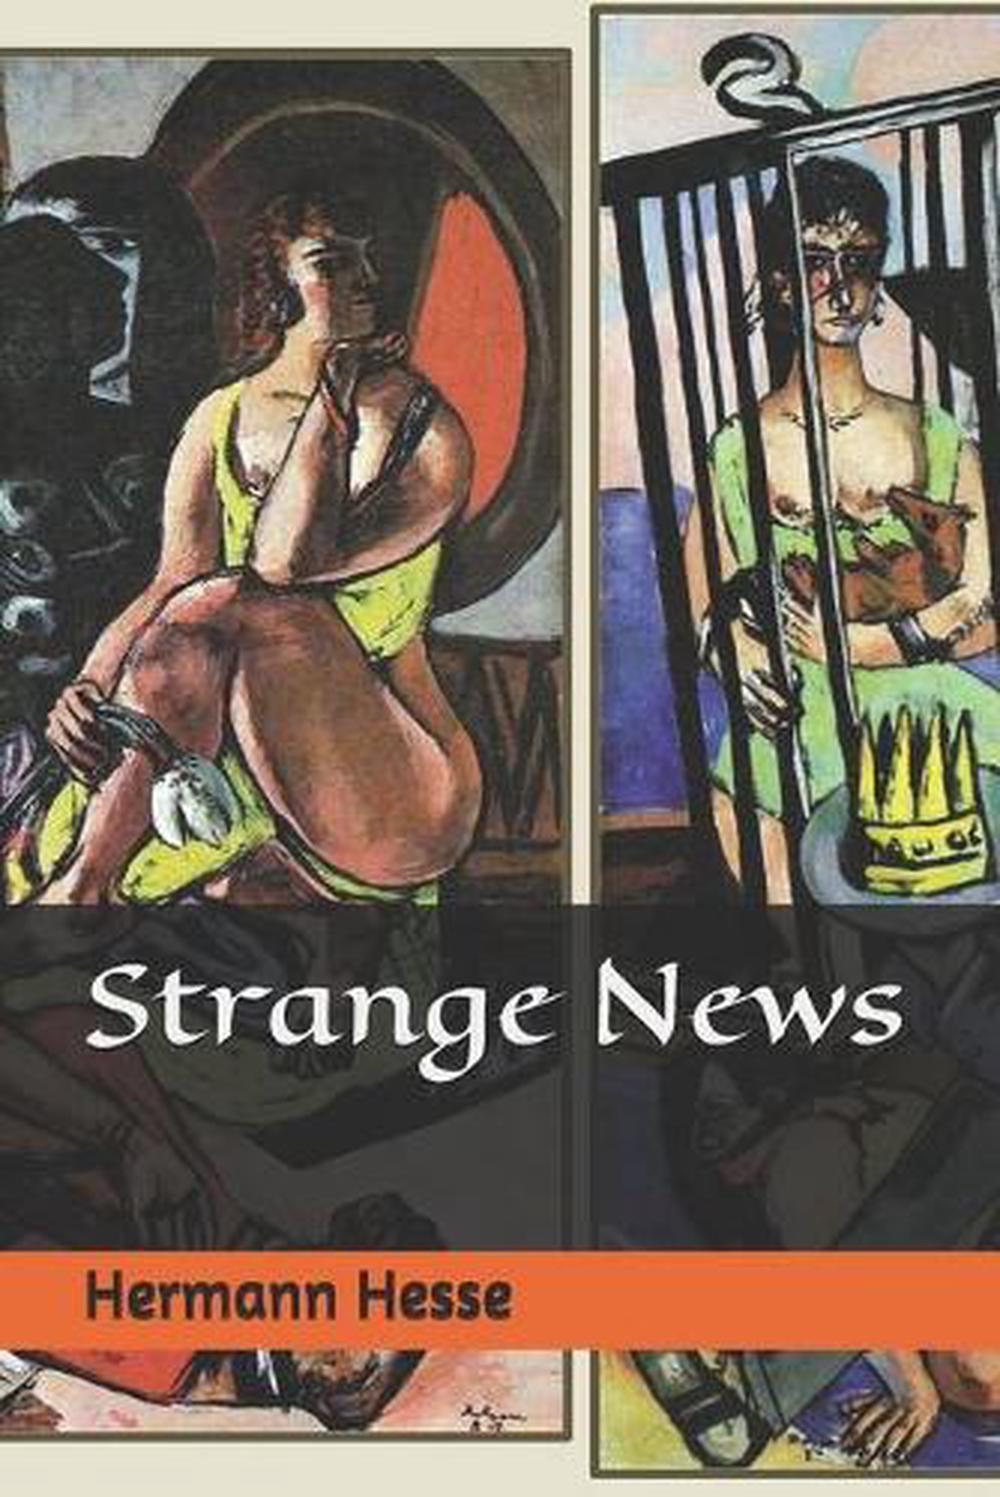 Strange News from Another Star by Hermann Hesse